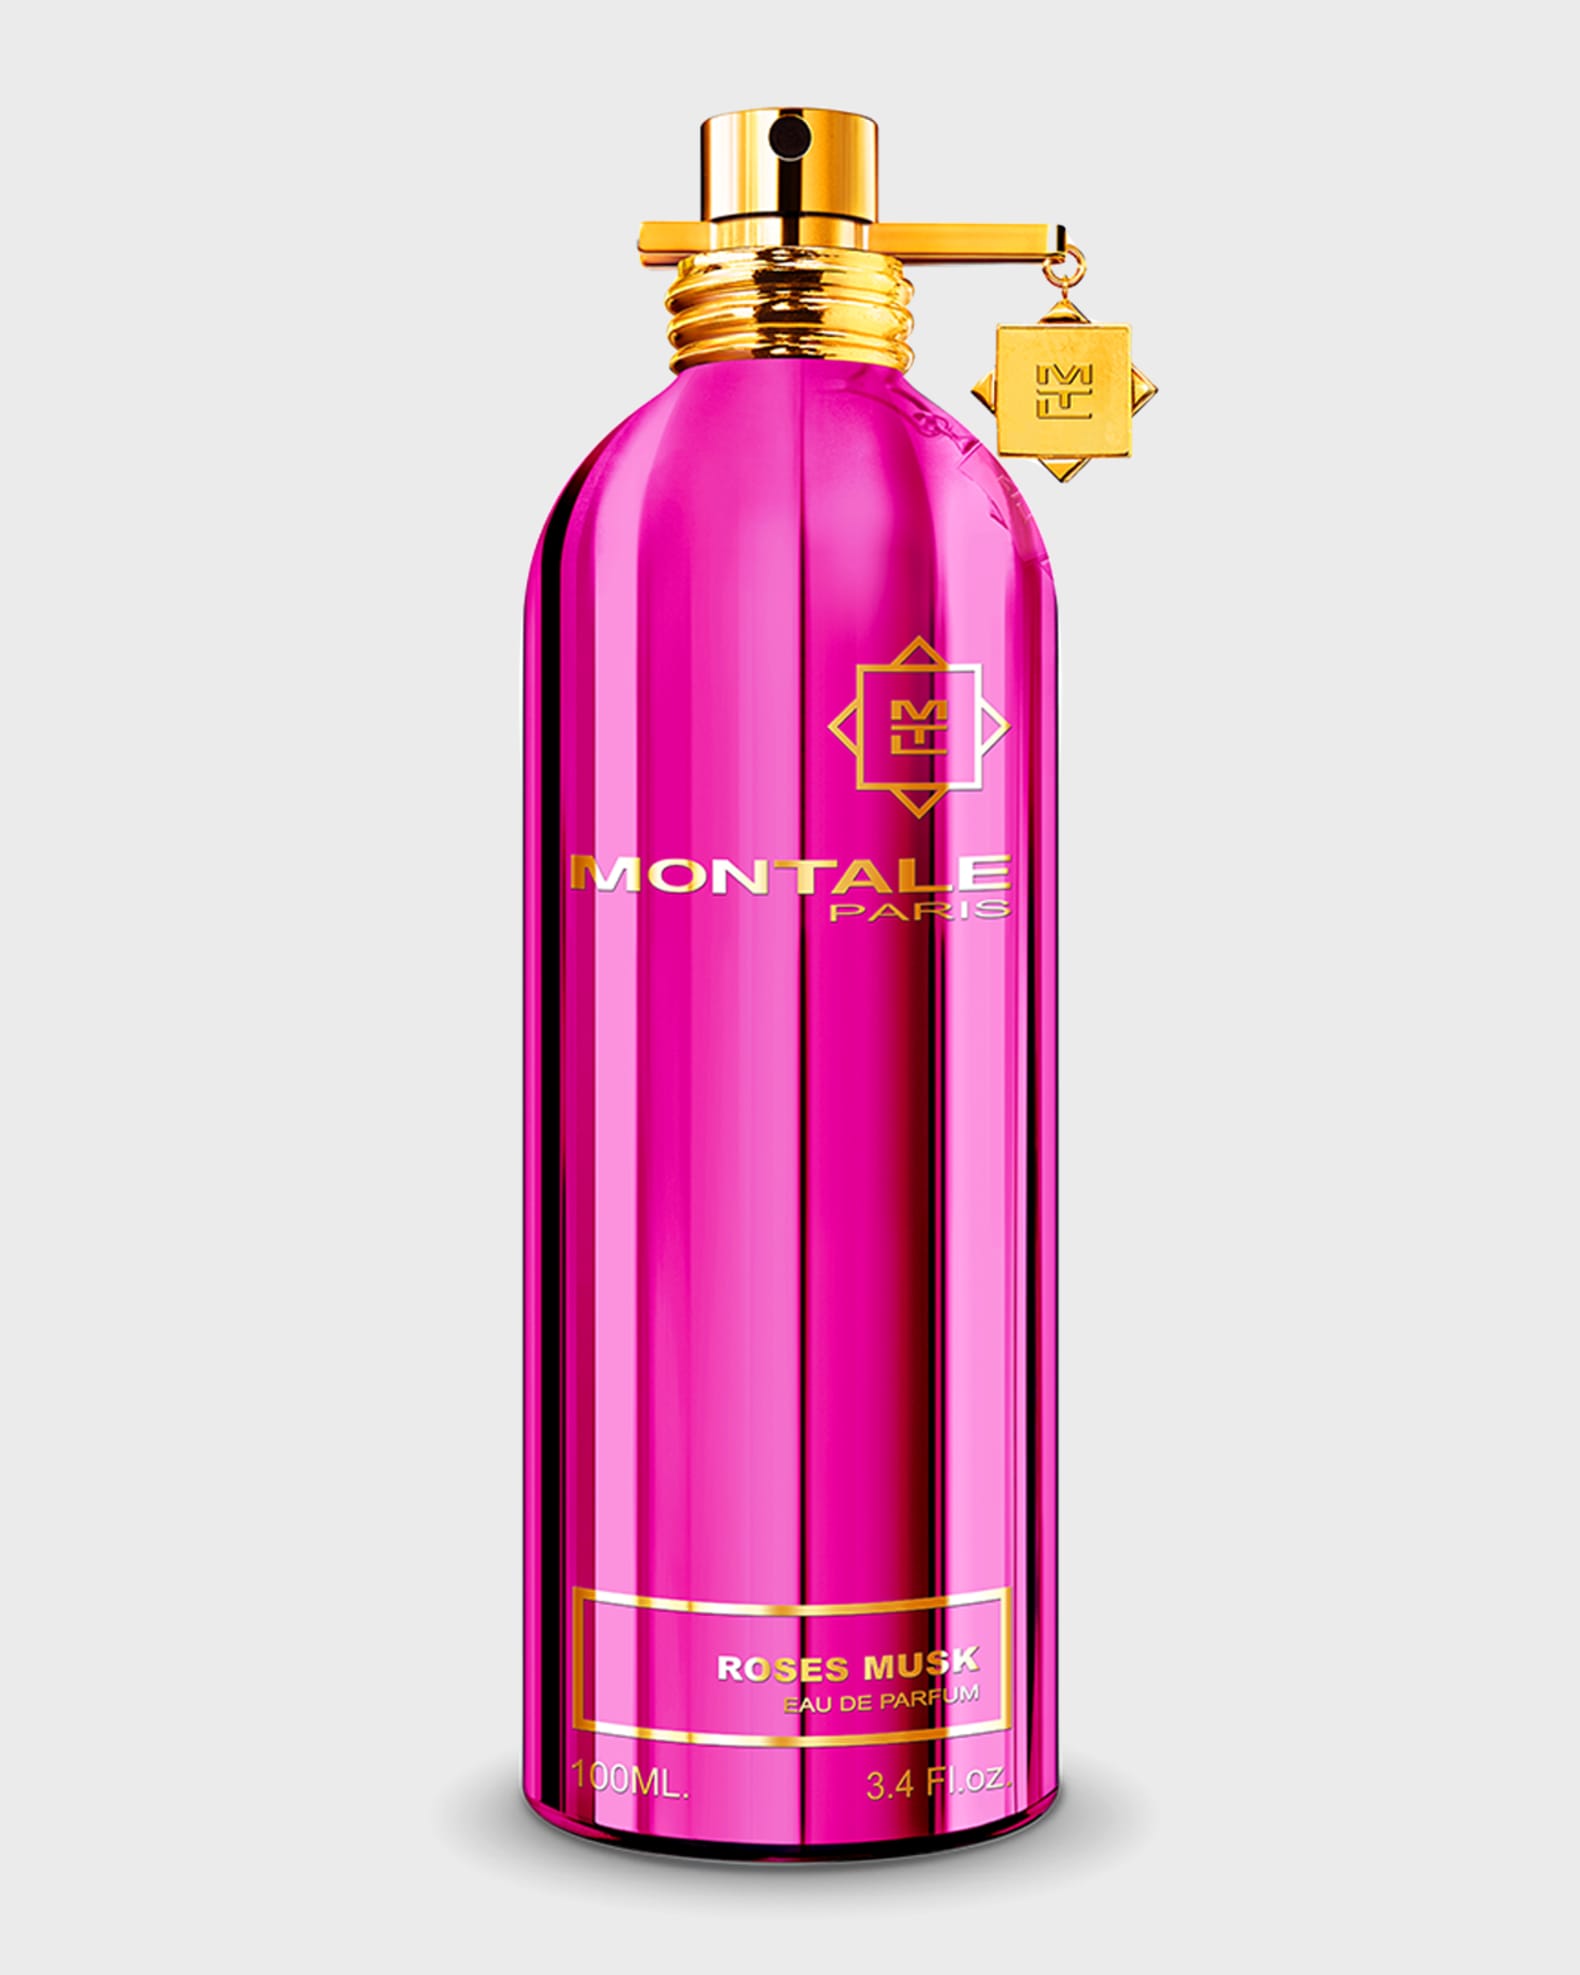 Духи montale roses. Montale Roses Musk 100ml. Духи Montale Paris Roses Musk. Montale Roses Musk Perfume. Montale Roses Musk 100 мл.